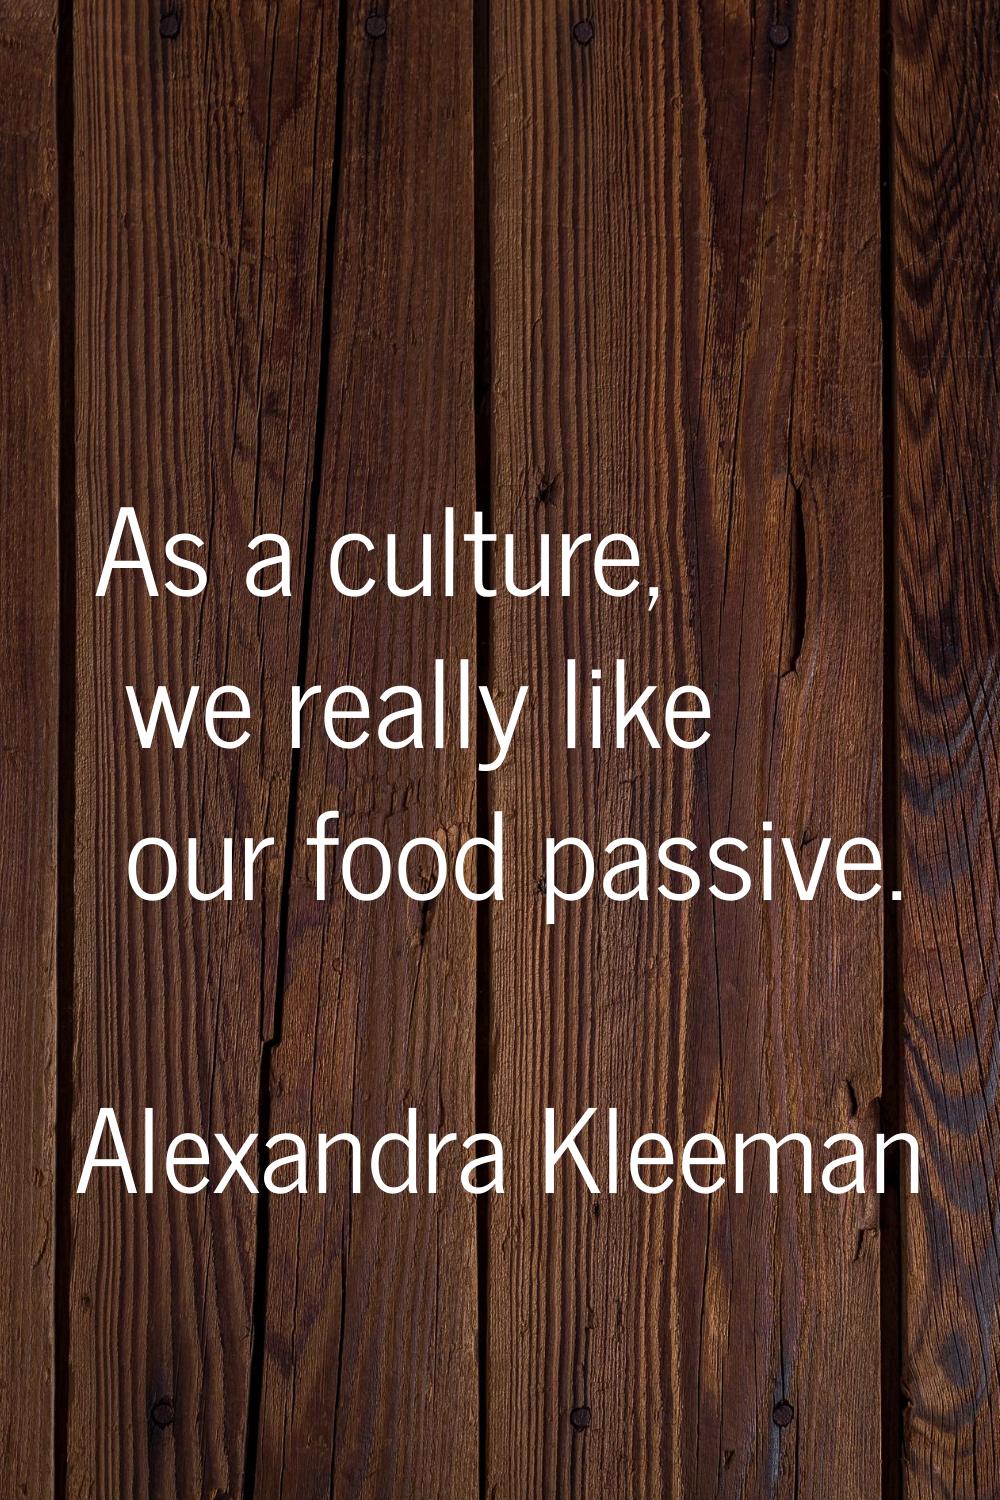 As a culture, we really like our food passive.